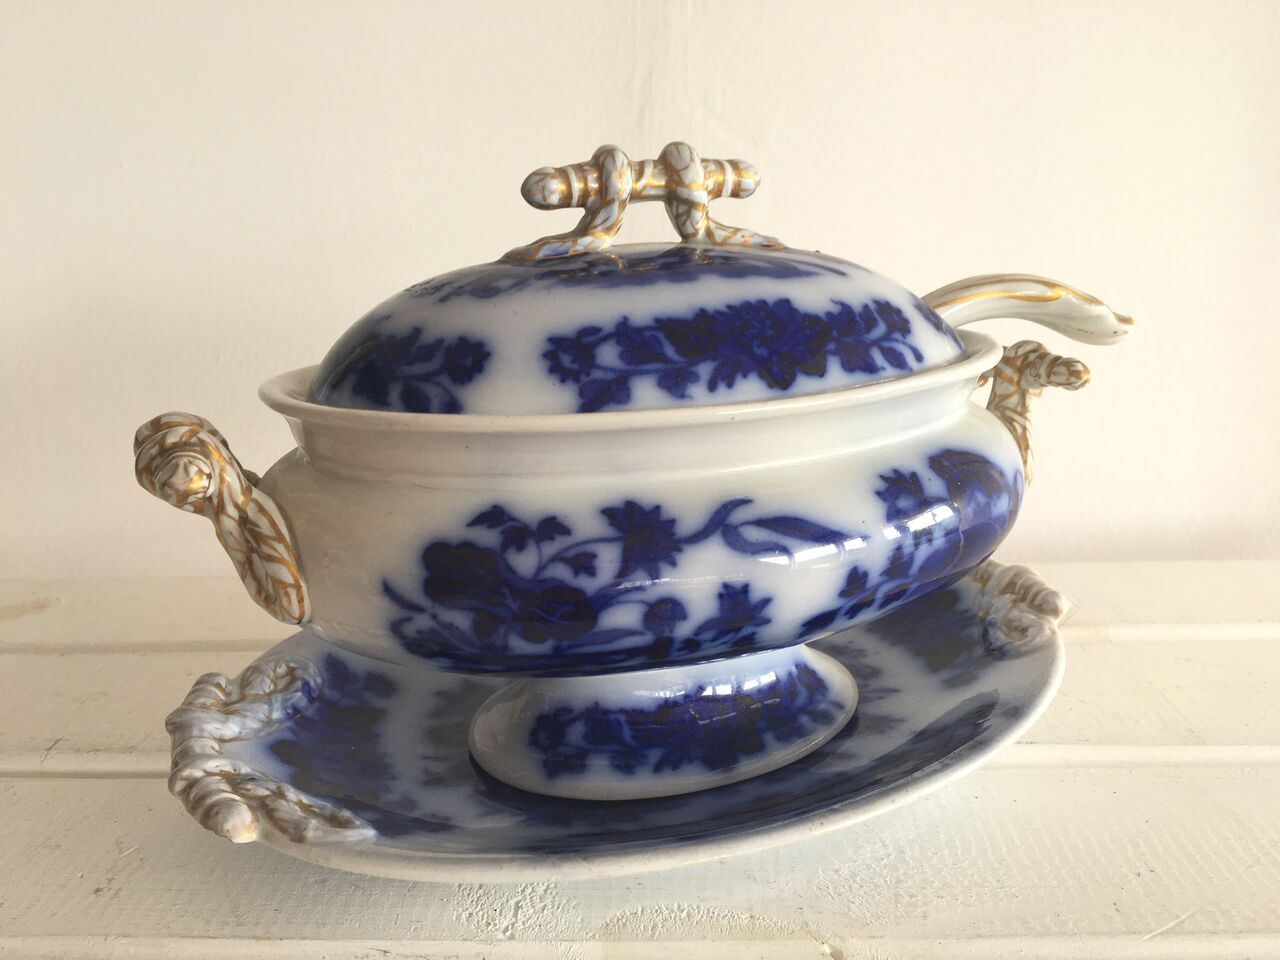 RARE ANTIQUE ASHWORTH FLOW BLUE TUREEN c1870. COMPLETE WITH LID, LADLE & UNDERPLATE. CONDITION - - Image 2 of 8